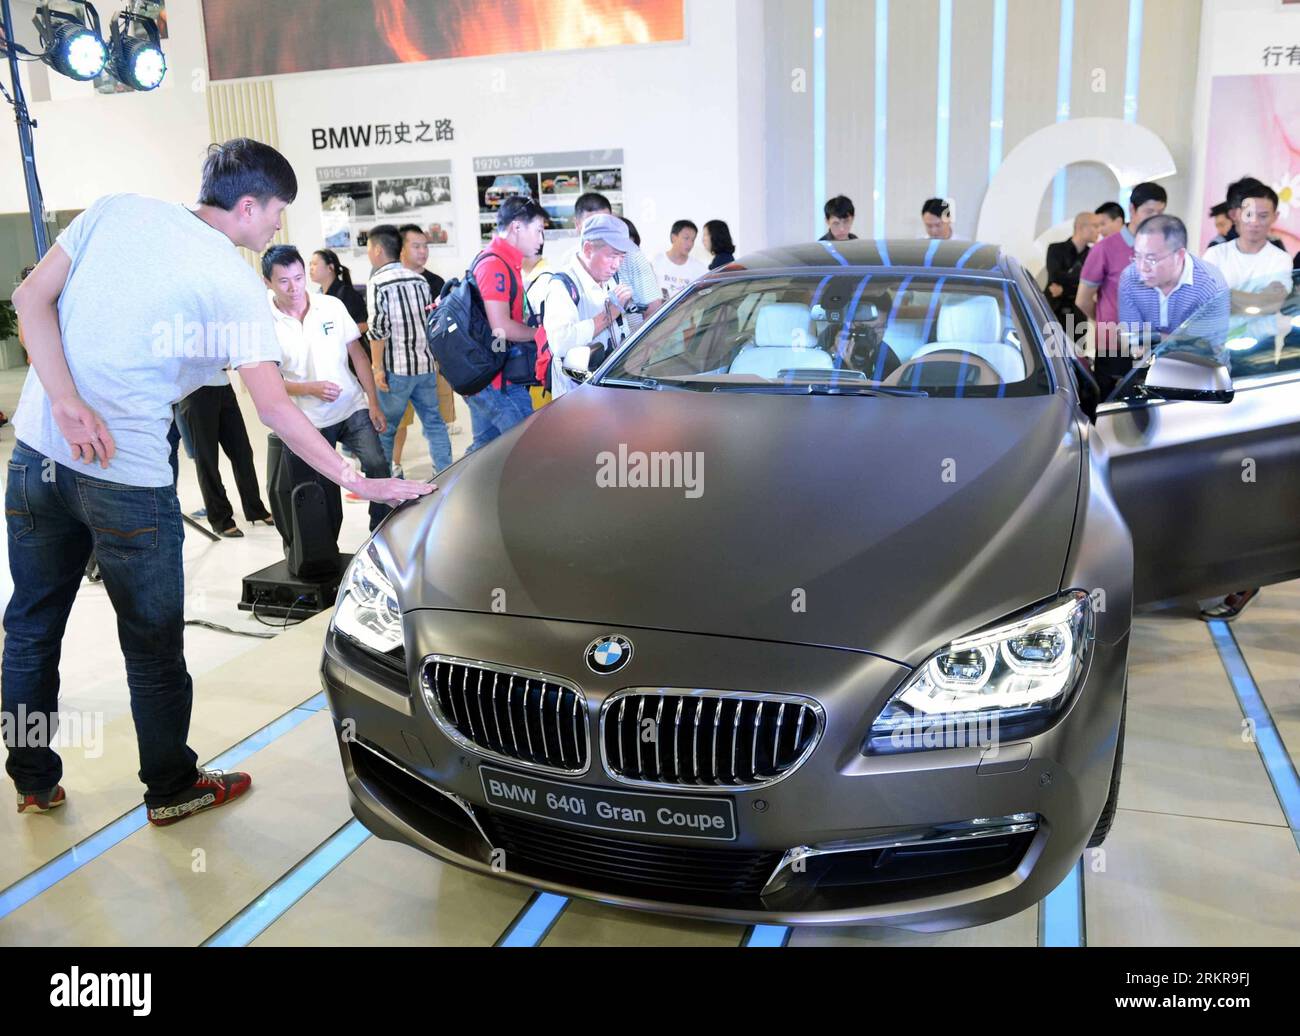 (120628) -- KUNMING, June 28, 2012 (Xinhua) -- Visitors watch a Bavarian Motor Works(BMW) car on the 13th China (Kunming) Pan-Asia International Automobile Exhibition in Kunming, capital of southwest China s Yunnan Province, June 28, 2012. The exhibition themed as Green Life, Scientific Future kicked off on Thursday. (Xinhua/Yang Zongyou) (zkr) CHINA-KUNMING-PAN-ASIA INTERNATIONAL AUTOMOBILE EXHIBITION(CN) PUBLICATIONxNOTxINxCHN   Kunming June 28 2012 XINHUA Visitors Watch a Bavarian Engine Works BMW Car ON The 13th China Kunming Pan Asia International Automobiles Exhibition in Kunming Capital Stock Photo